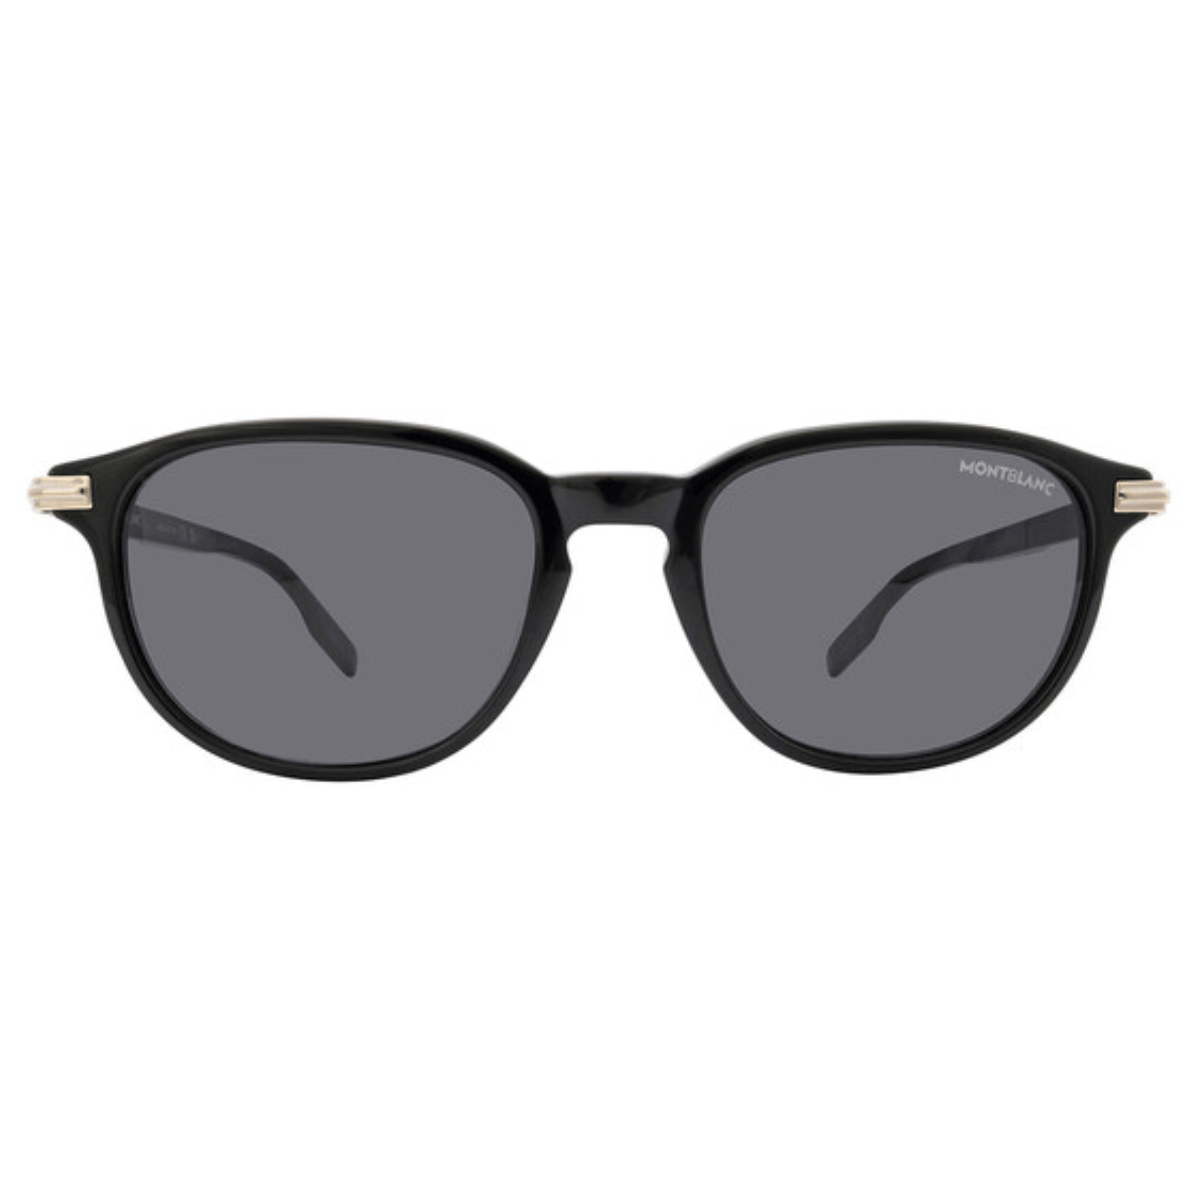 "Mont Blanc MB0276S sunglasses for men and women at Optorium. Stylish black and gold design, high-quality materials. Shop now for the ultimate summer look!"